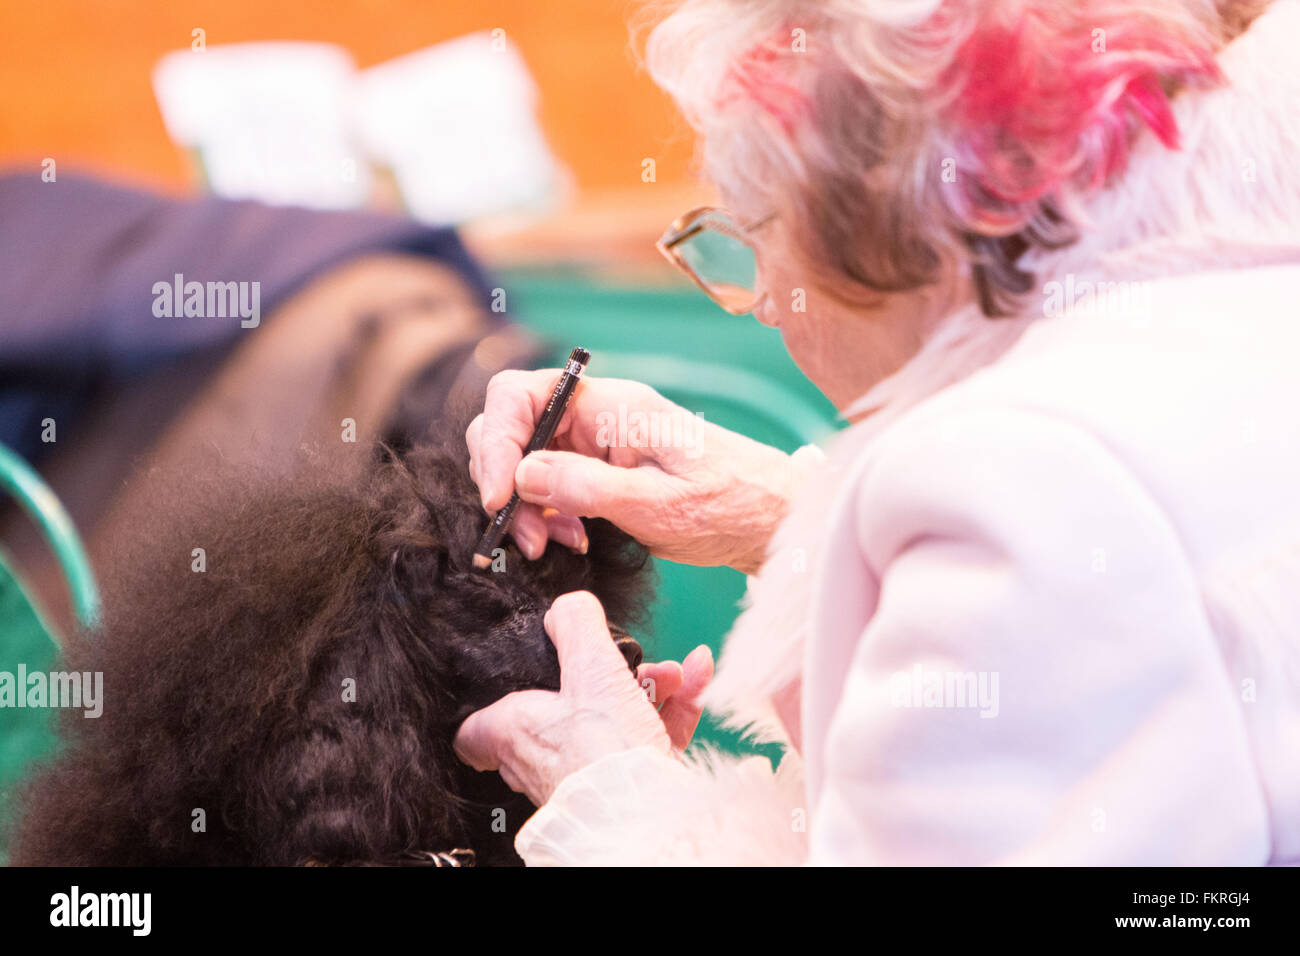 Birmingham, UK. 10th March, 2016. A lady applies eye makeup to her Miniature Poodle ahead of showing at Crufts 2016. Credit: Jon Freeman/Alamy Live News Stock Photo